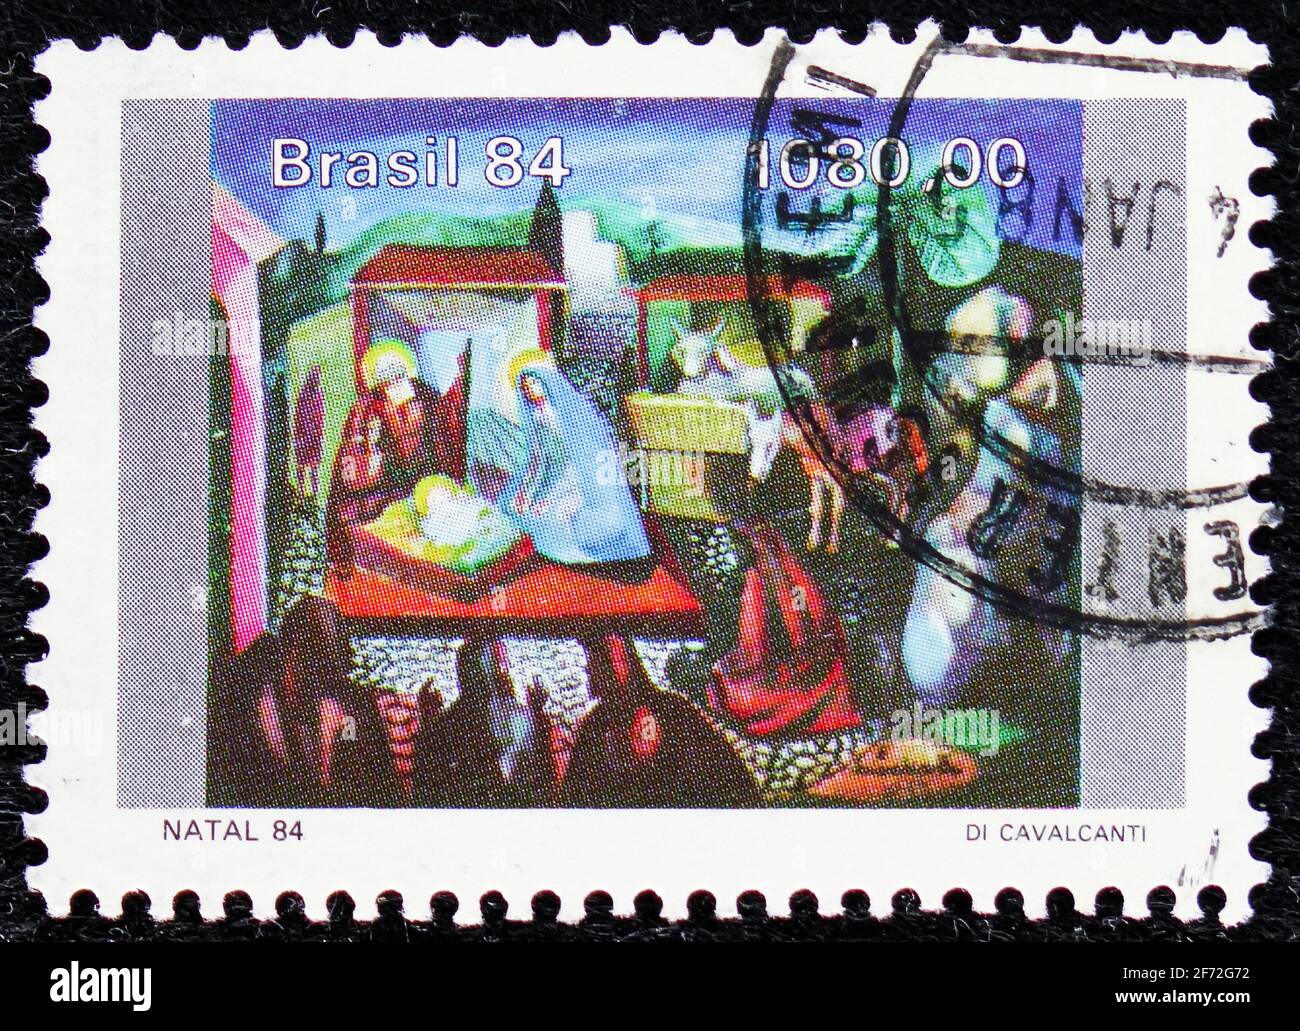 MOSCOW, RUSSIA - DECEMBER 22, 2020: Postage stamp printed in Brazil shows 'Nativity' (Emiliano Augusto di Cavalcanti), Christmas 1984 serie, circa 198 Stock Photo